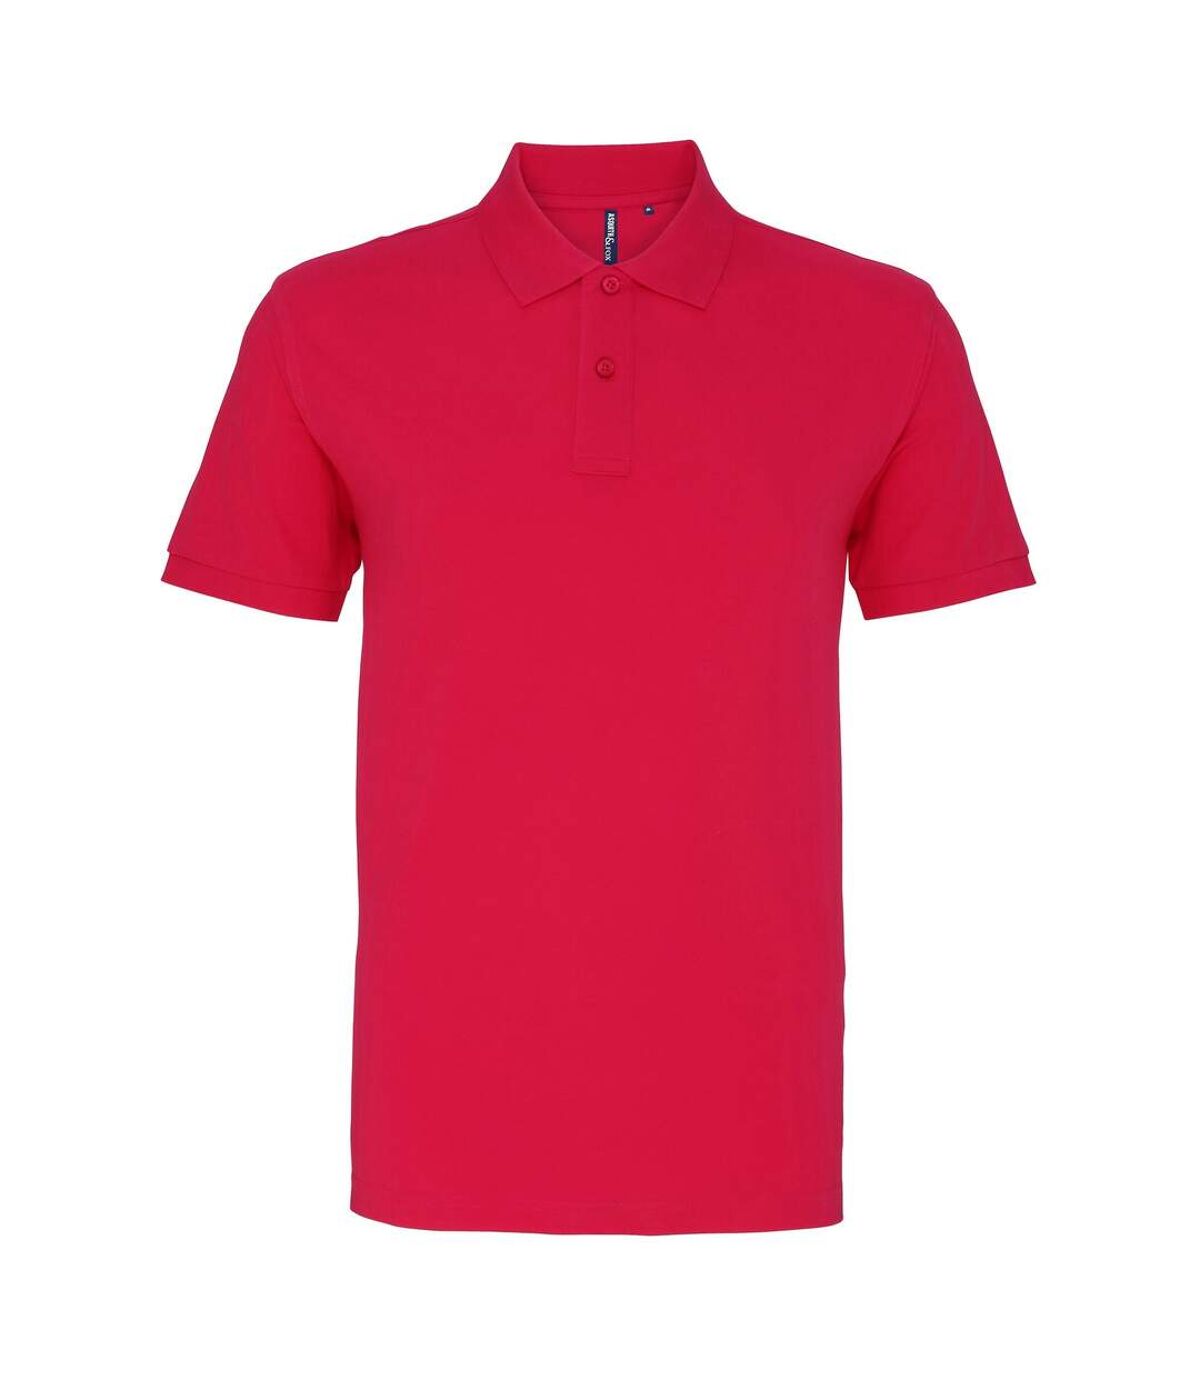 Asquith & Fox - Polo manches courtes - Homme (Rose) - UTRW3471